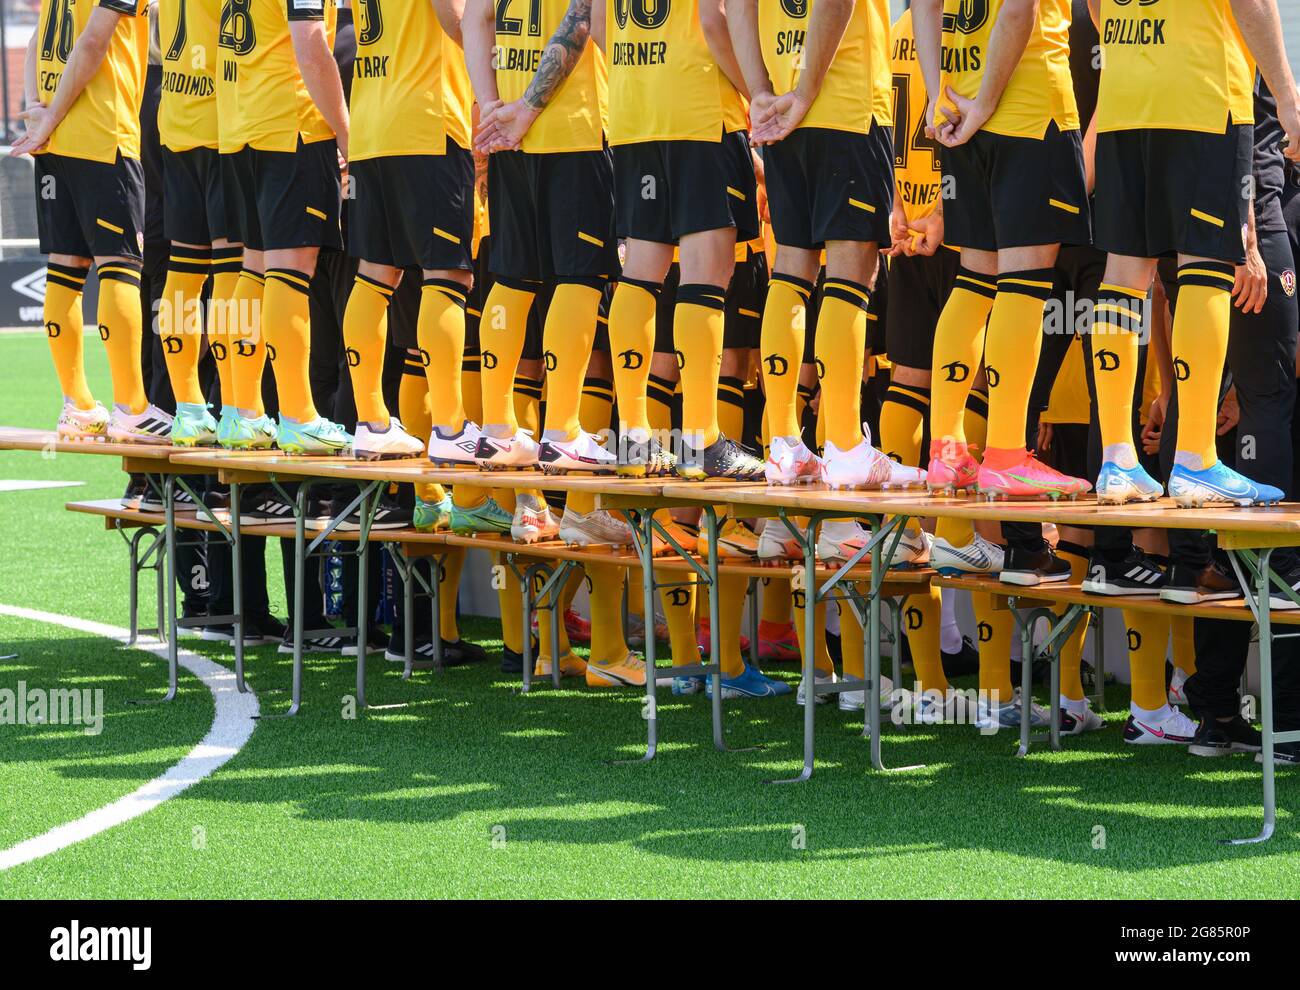 Dresden, Germany. 16th July, 2021. Football: 2. league, team photo session, SG Dynamo Dresden, season 2021/2021, at the Aok Plus Walter-Fritzsch-Akademie. The players are standing on beer tables. Credit: Robert Michael/dpa-Zentralbild/dpa - IMPORTANT NOTE: In accordance with the regulations of the DFL Deutsche Fußball Liga and/or the DFB Deutscher Fußball-Bund, it is prohibited to use or have used photographs taken in the stadium and/or of the match in the form of sequence pictures and/or video-like photo series./dpa/Alamy Live News Stock Photo